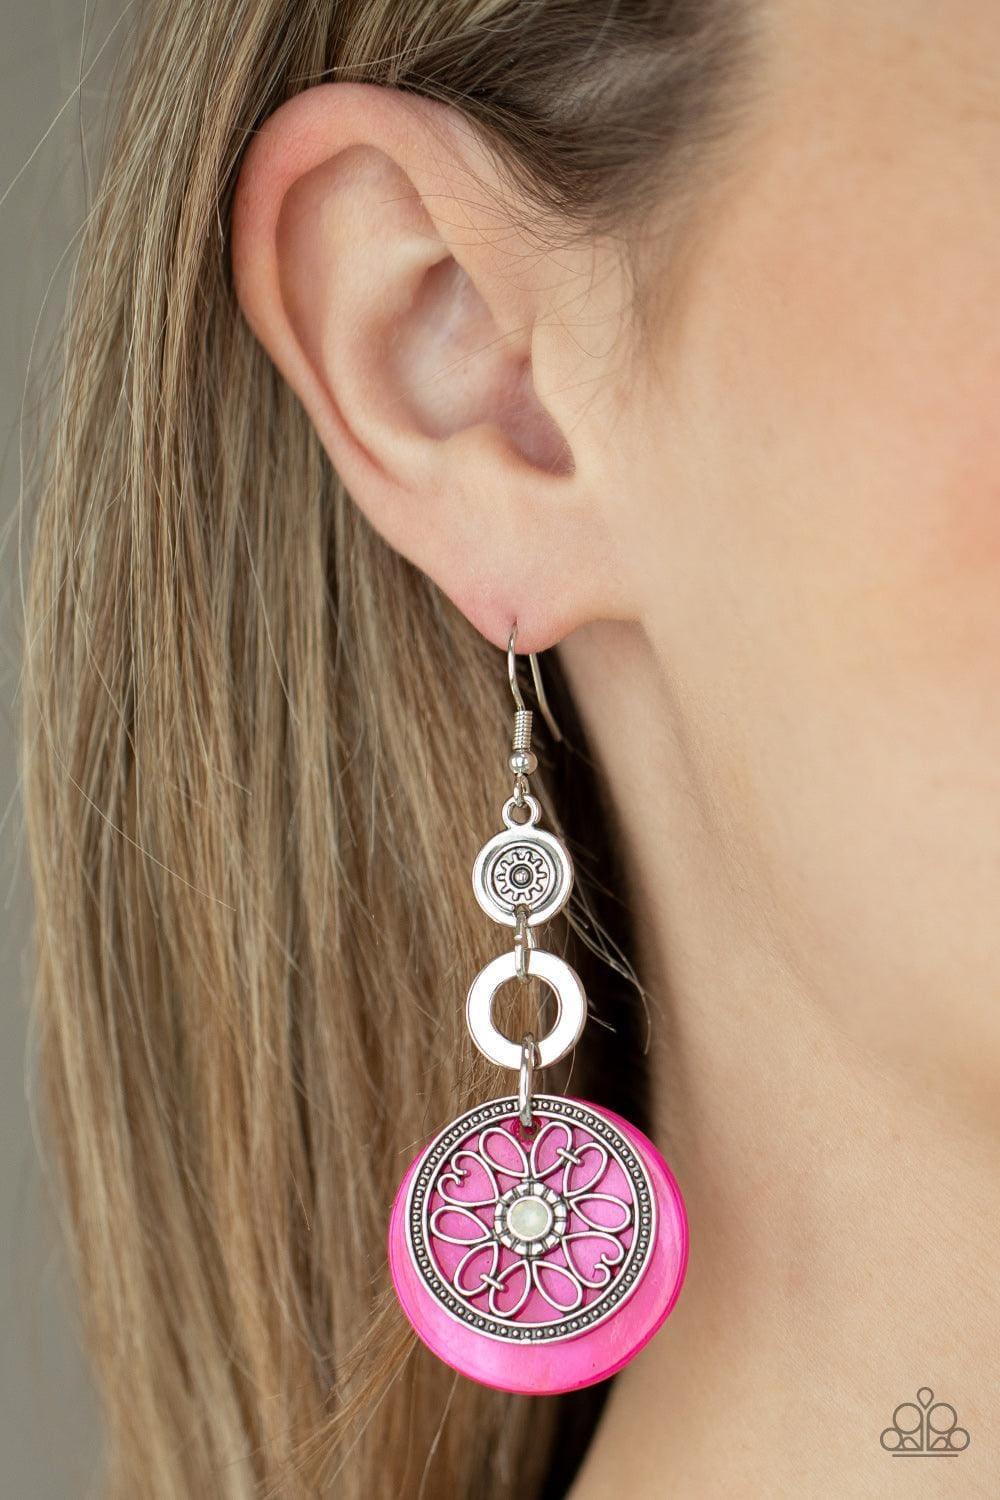 Paparazzi Accessories - Royal Marina - Pink Earrings - Bling by JessieK